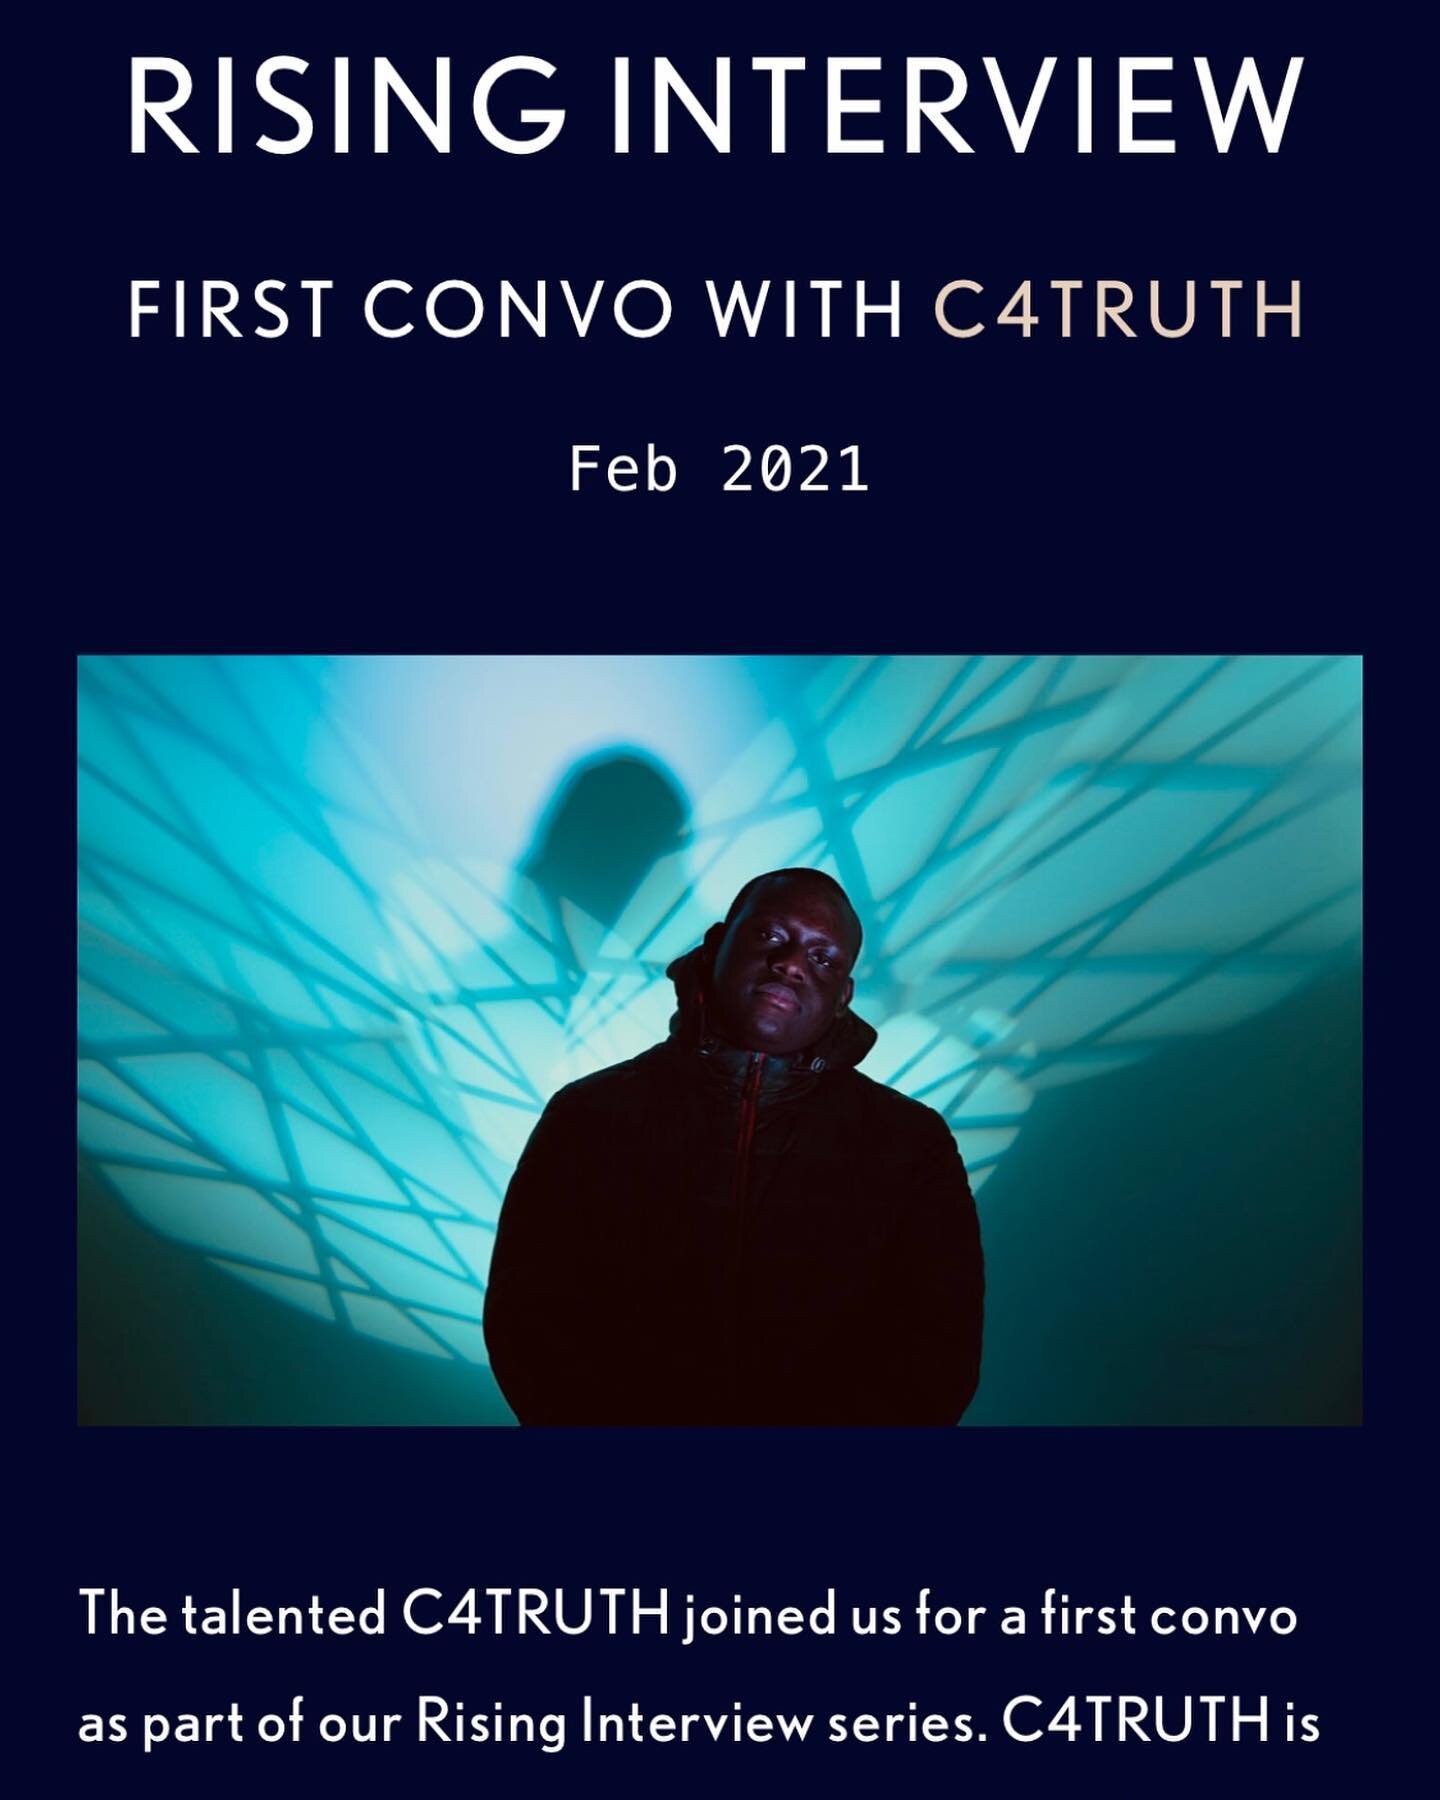 Featuring talented rising artist @c4truth for an interview in our RISING series 📰 He released his latest track #differences last week - check it out if you haven&rsquo;t already! #interview #risingartist #kingdomldn